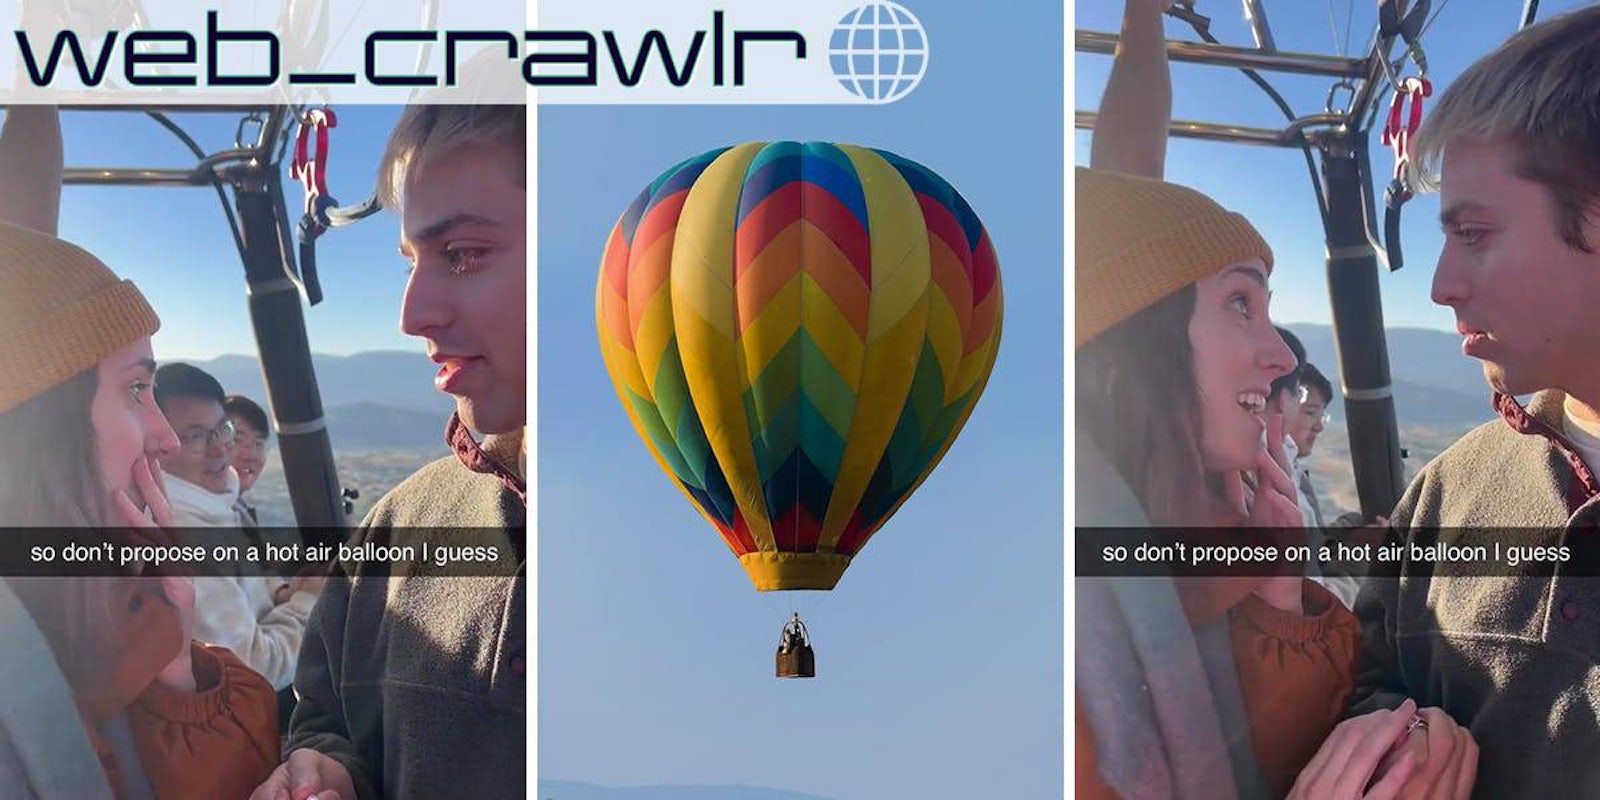 man proposing to girlfriend on hot air balloon with caption 'so don't propose on a hot air balloon I guess' (l) hot air balloon in blue sky (c) man proposing to girlfriend on hot air balloon with caption 'so don't propose on a hot air balloon I guess' (r)